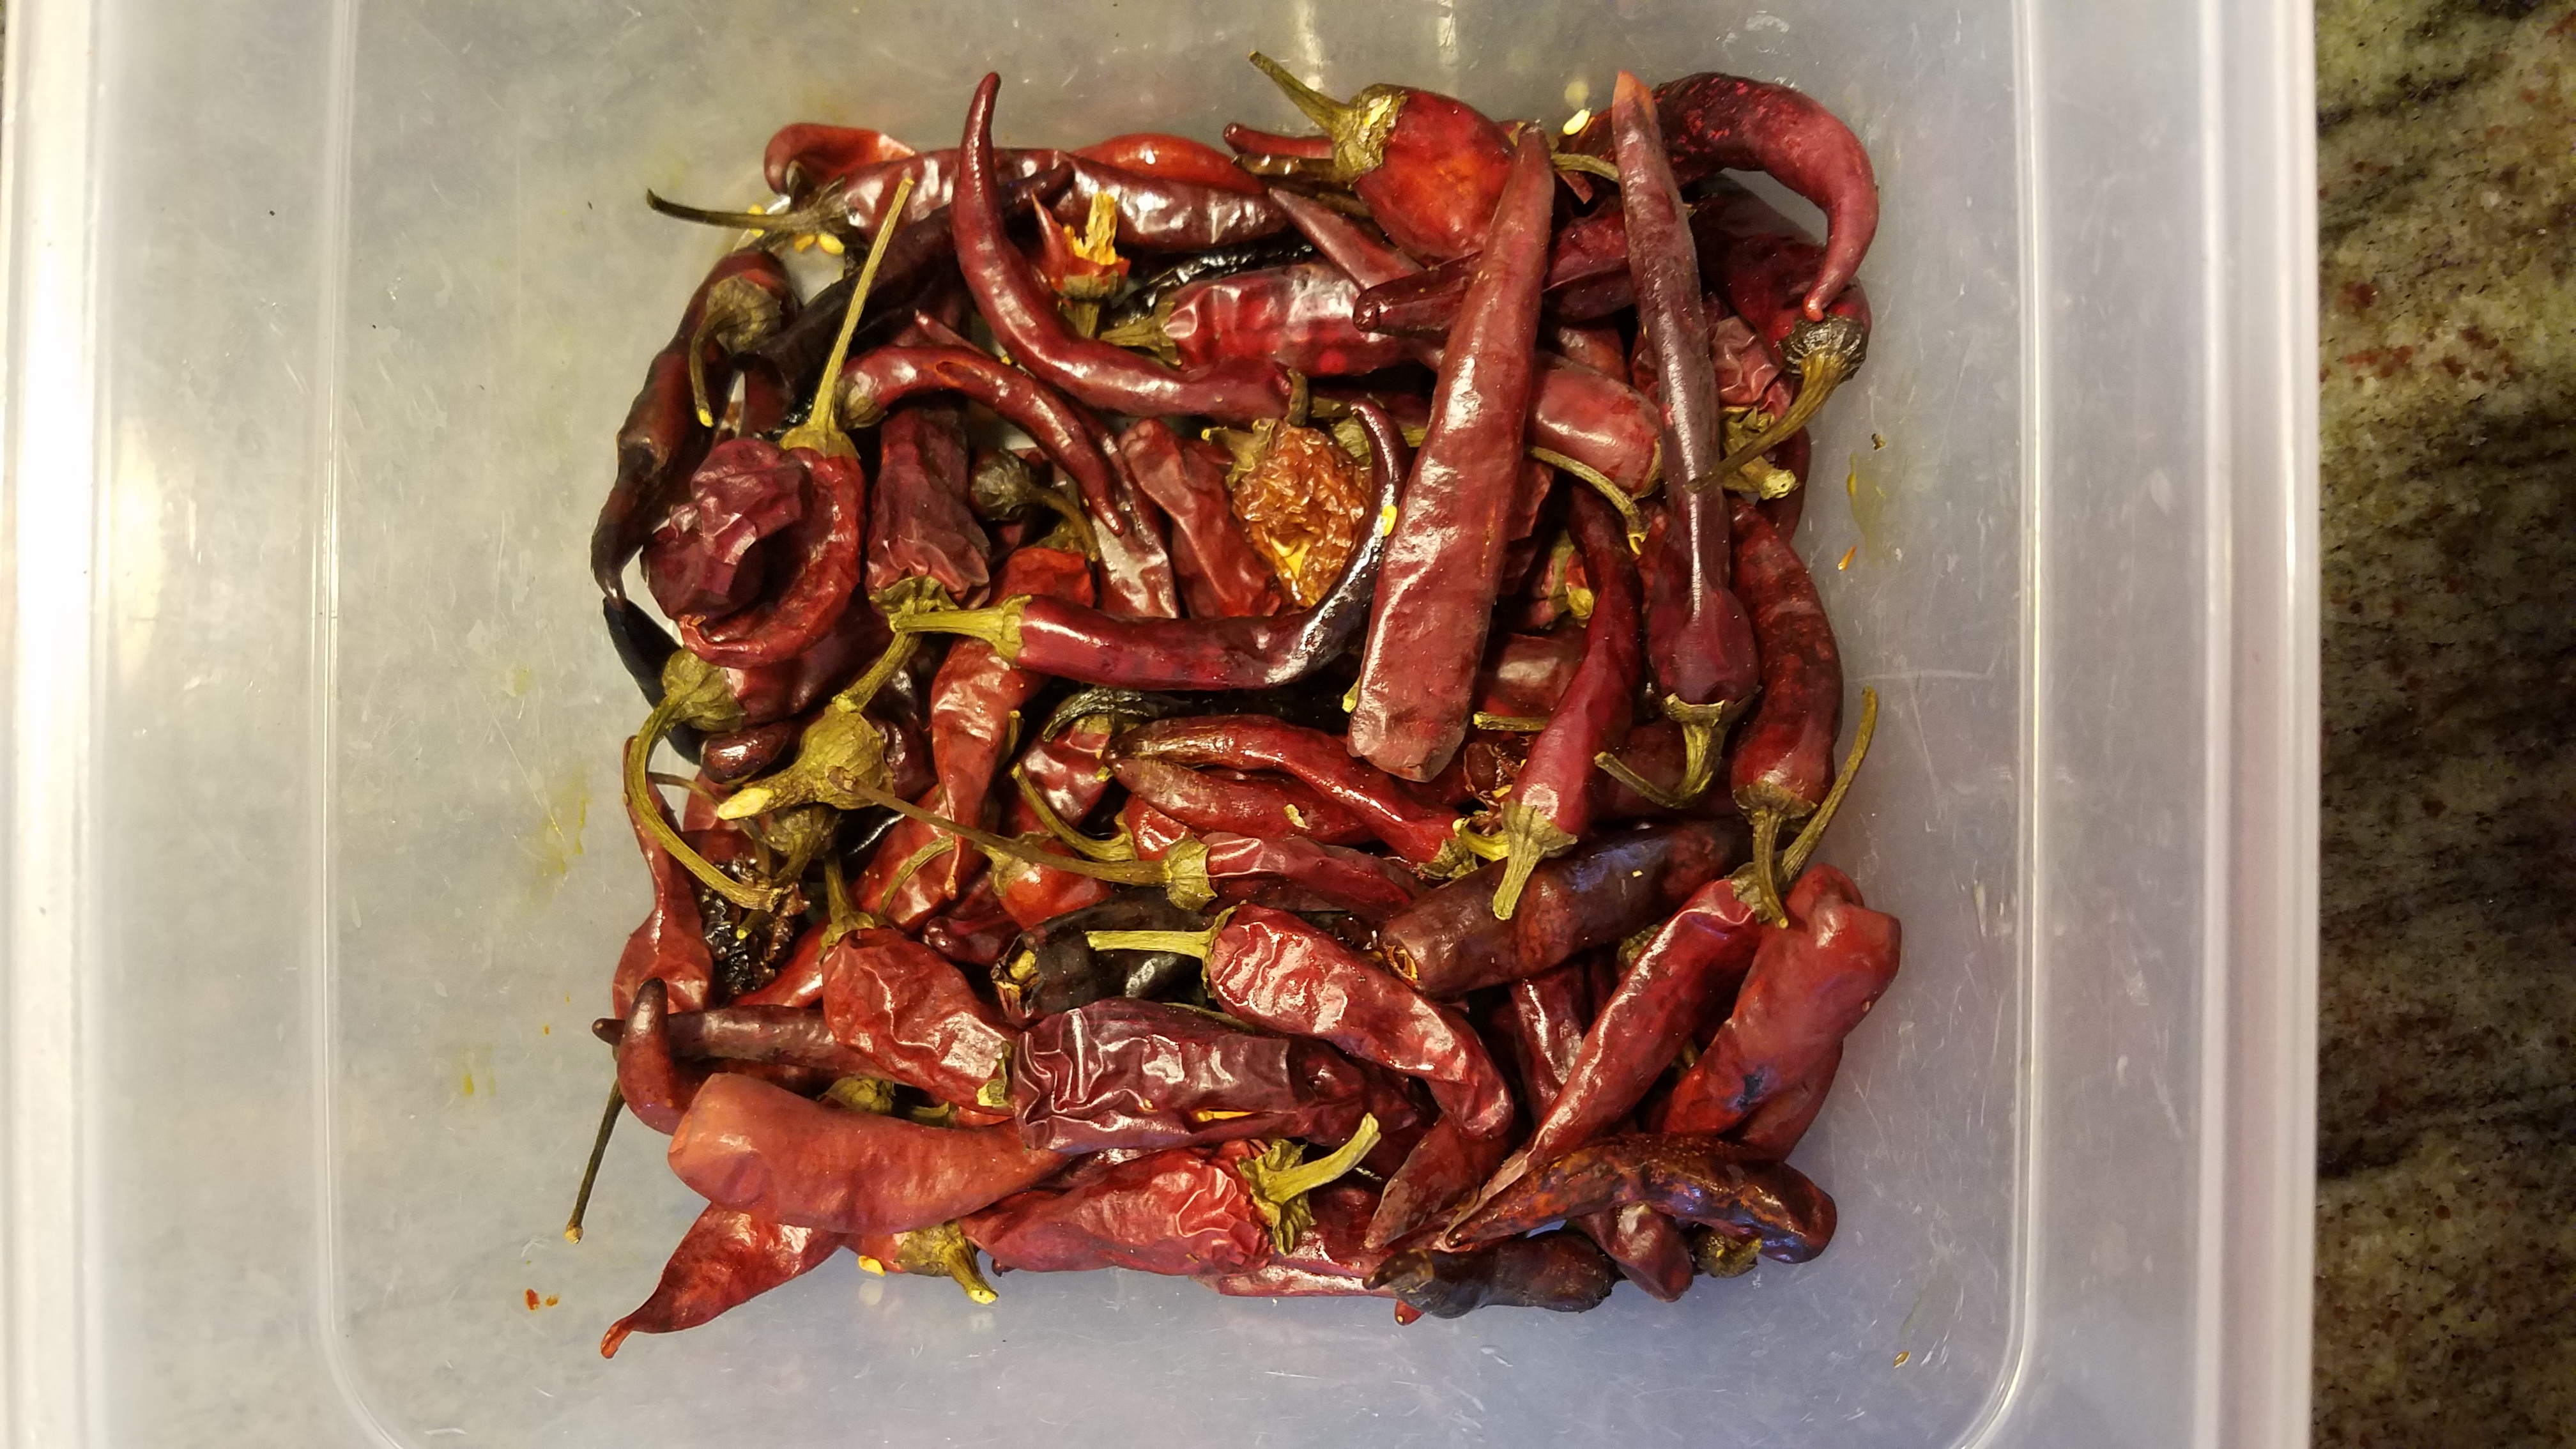 photo of cayenne after smoking peppers